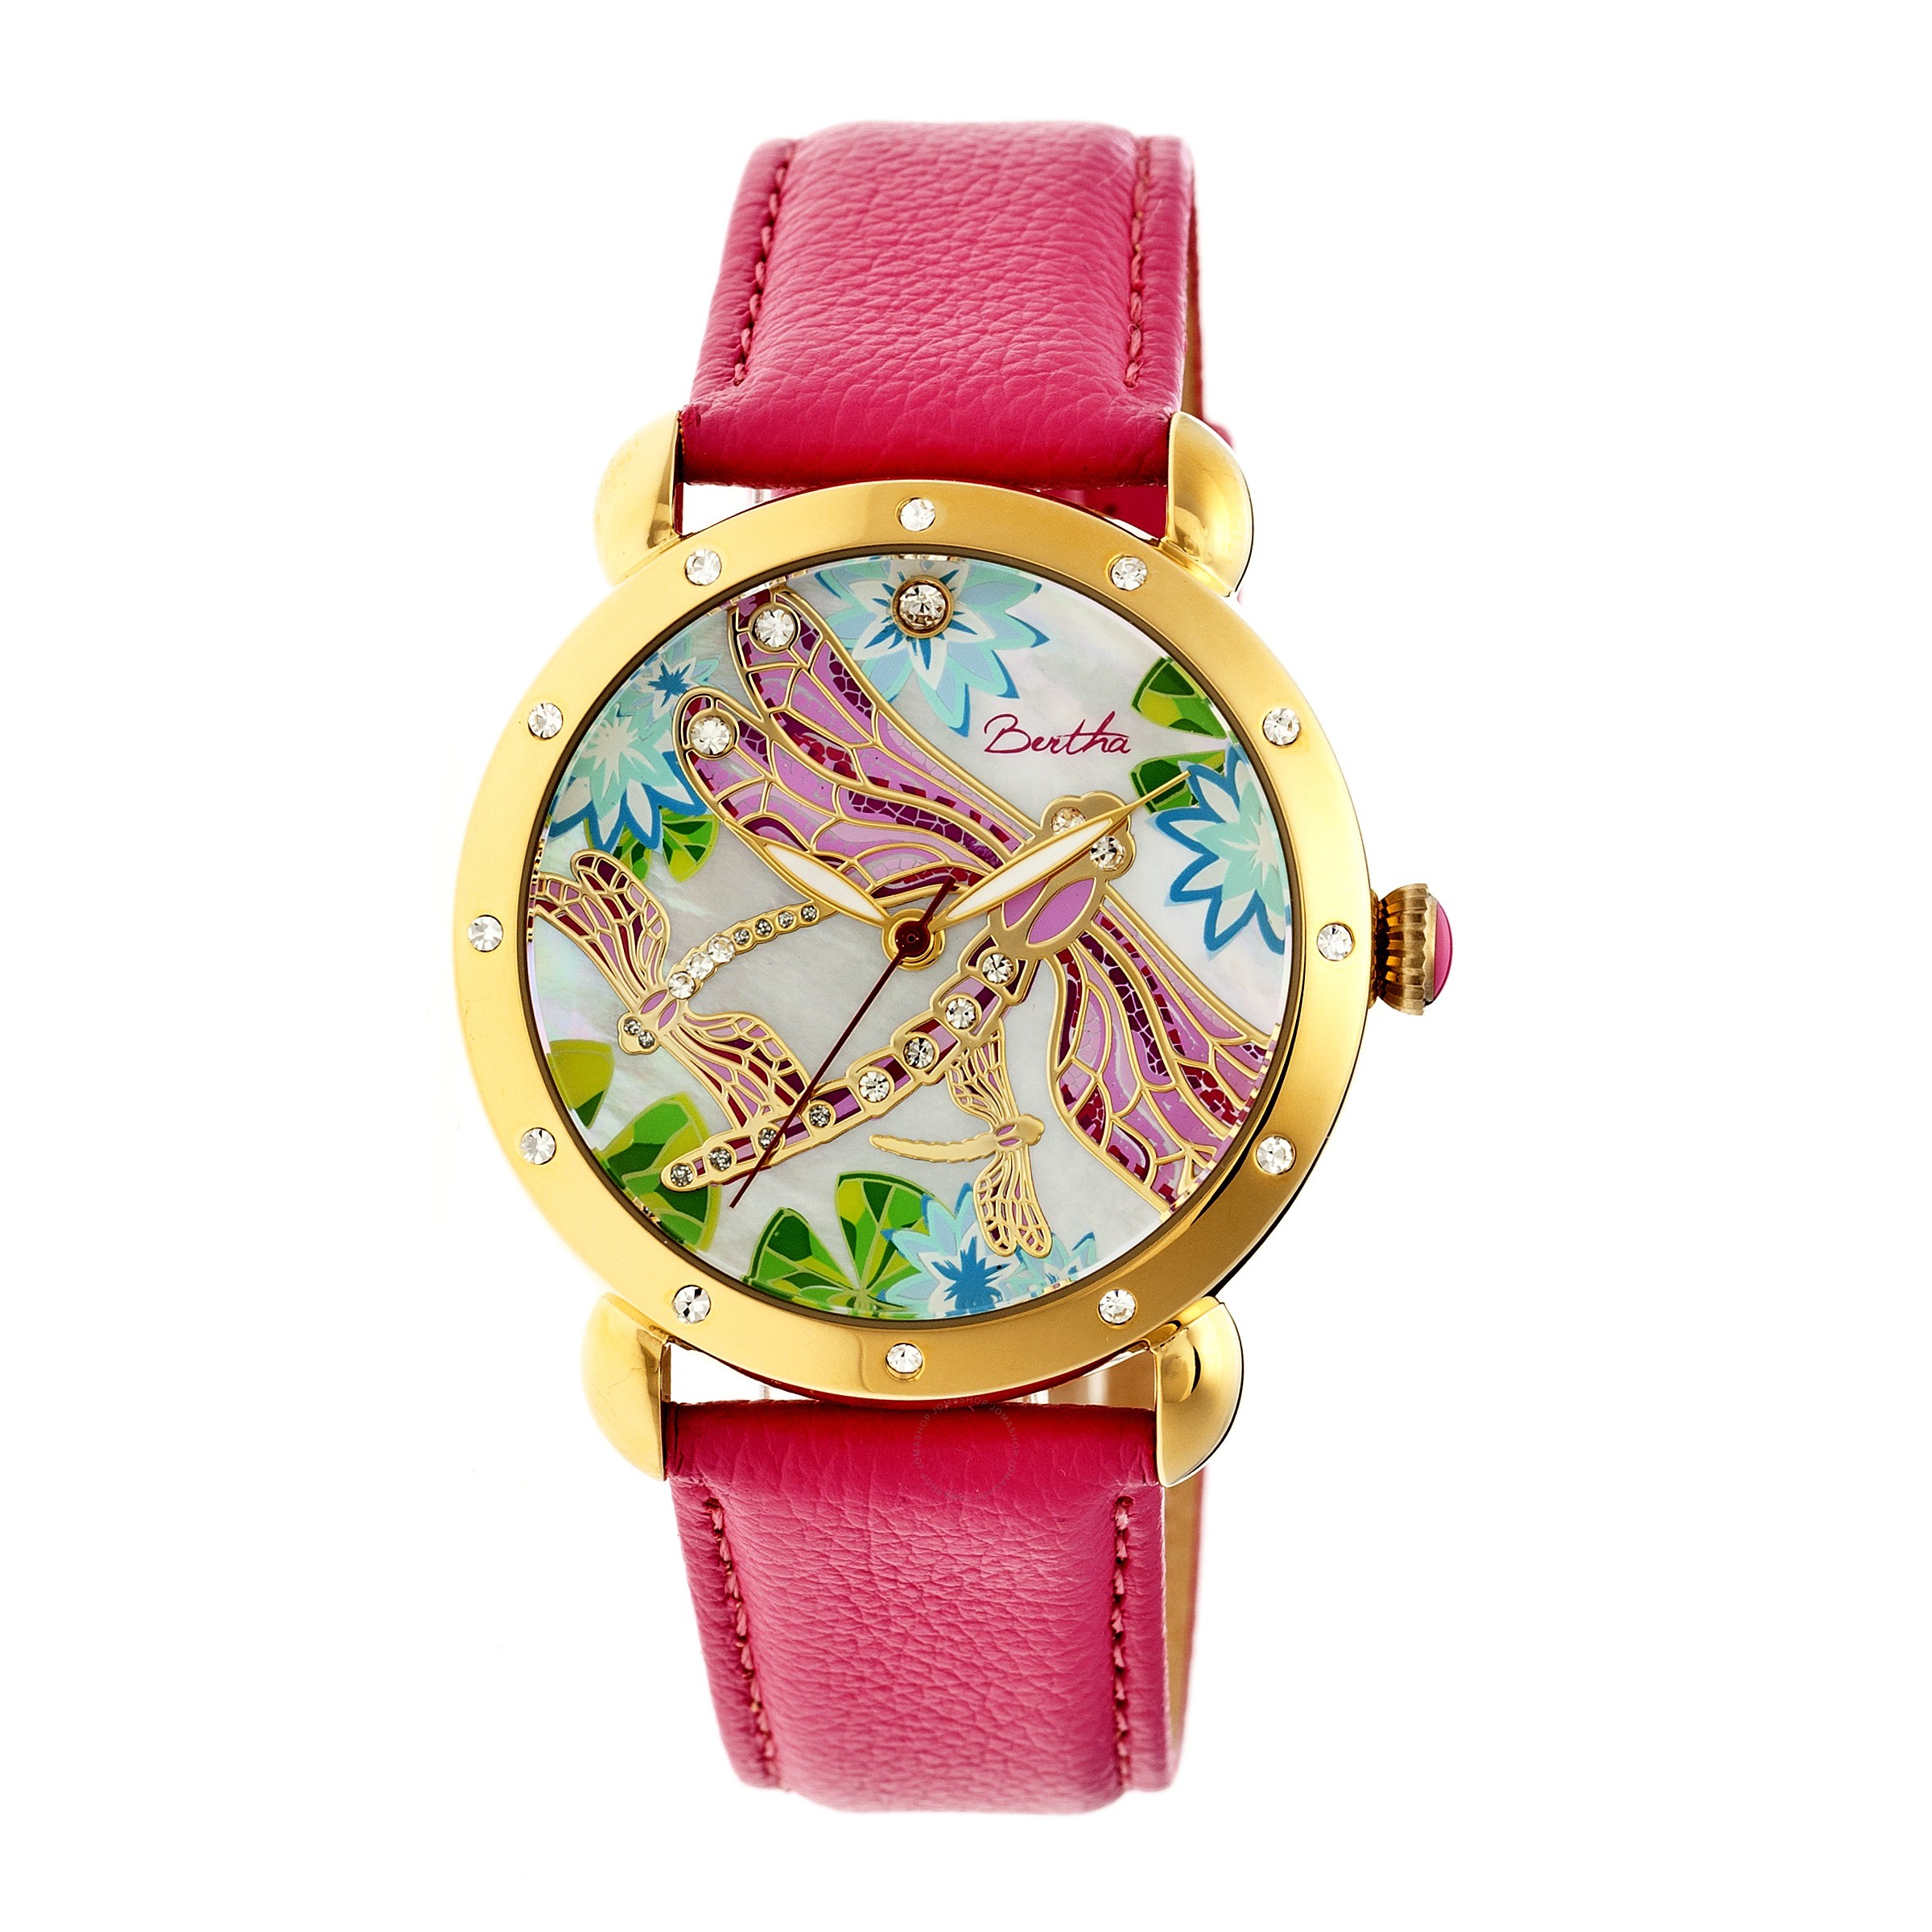 Bertha Jennifer Mother of Pearl Dragonfly Dial Hot Pink Leather Ladies Watch BTHBR5004